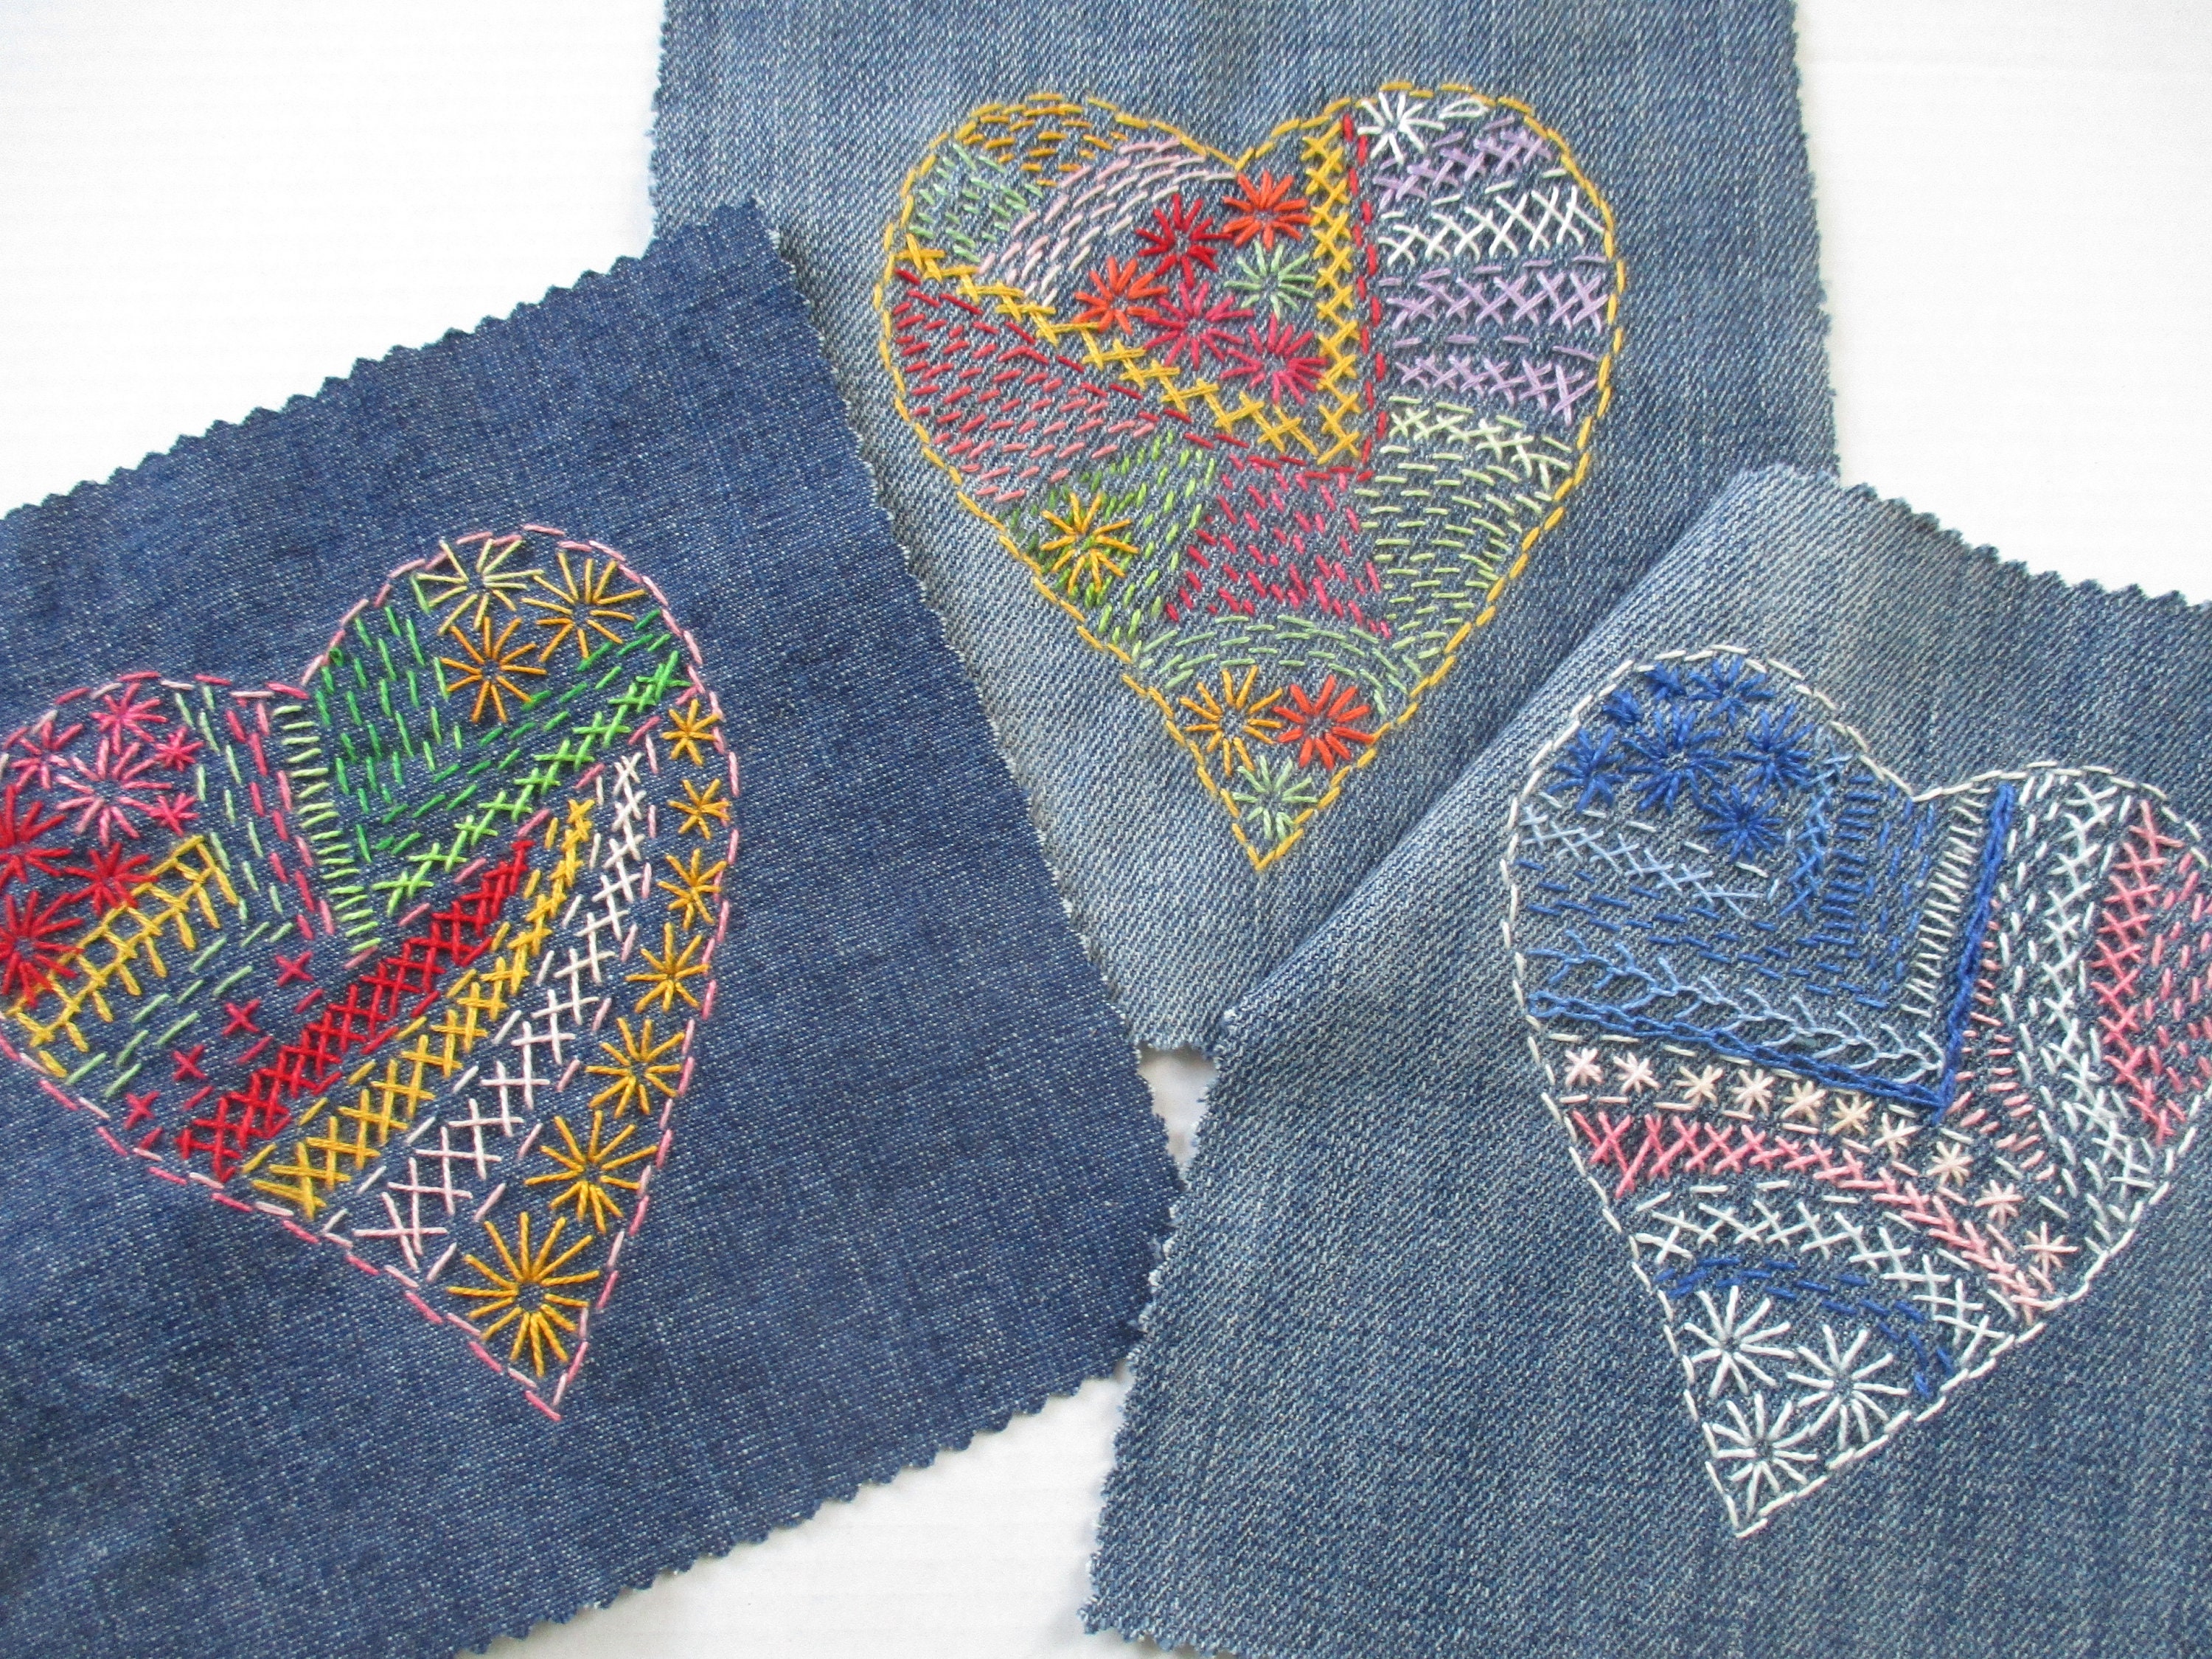 Colorful Boro Hand Embroidered Sew-on Denim Patch Wearable Art Patch  Sustainable Fashion Visible Mending Patched Jeans Boho Embellishment 